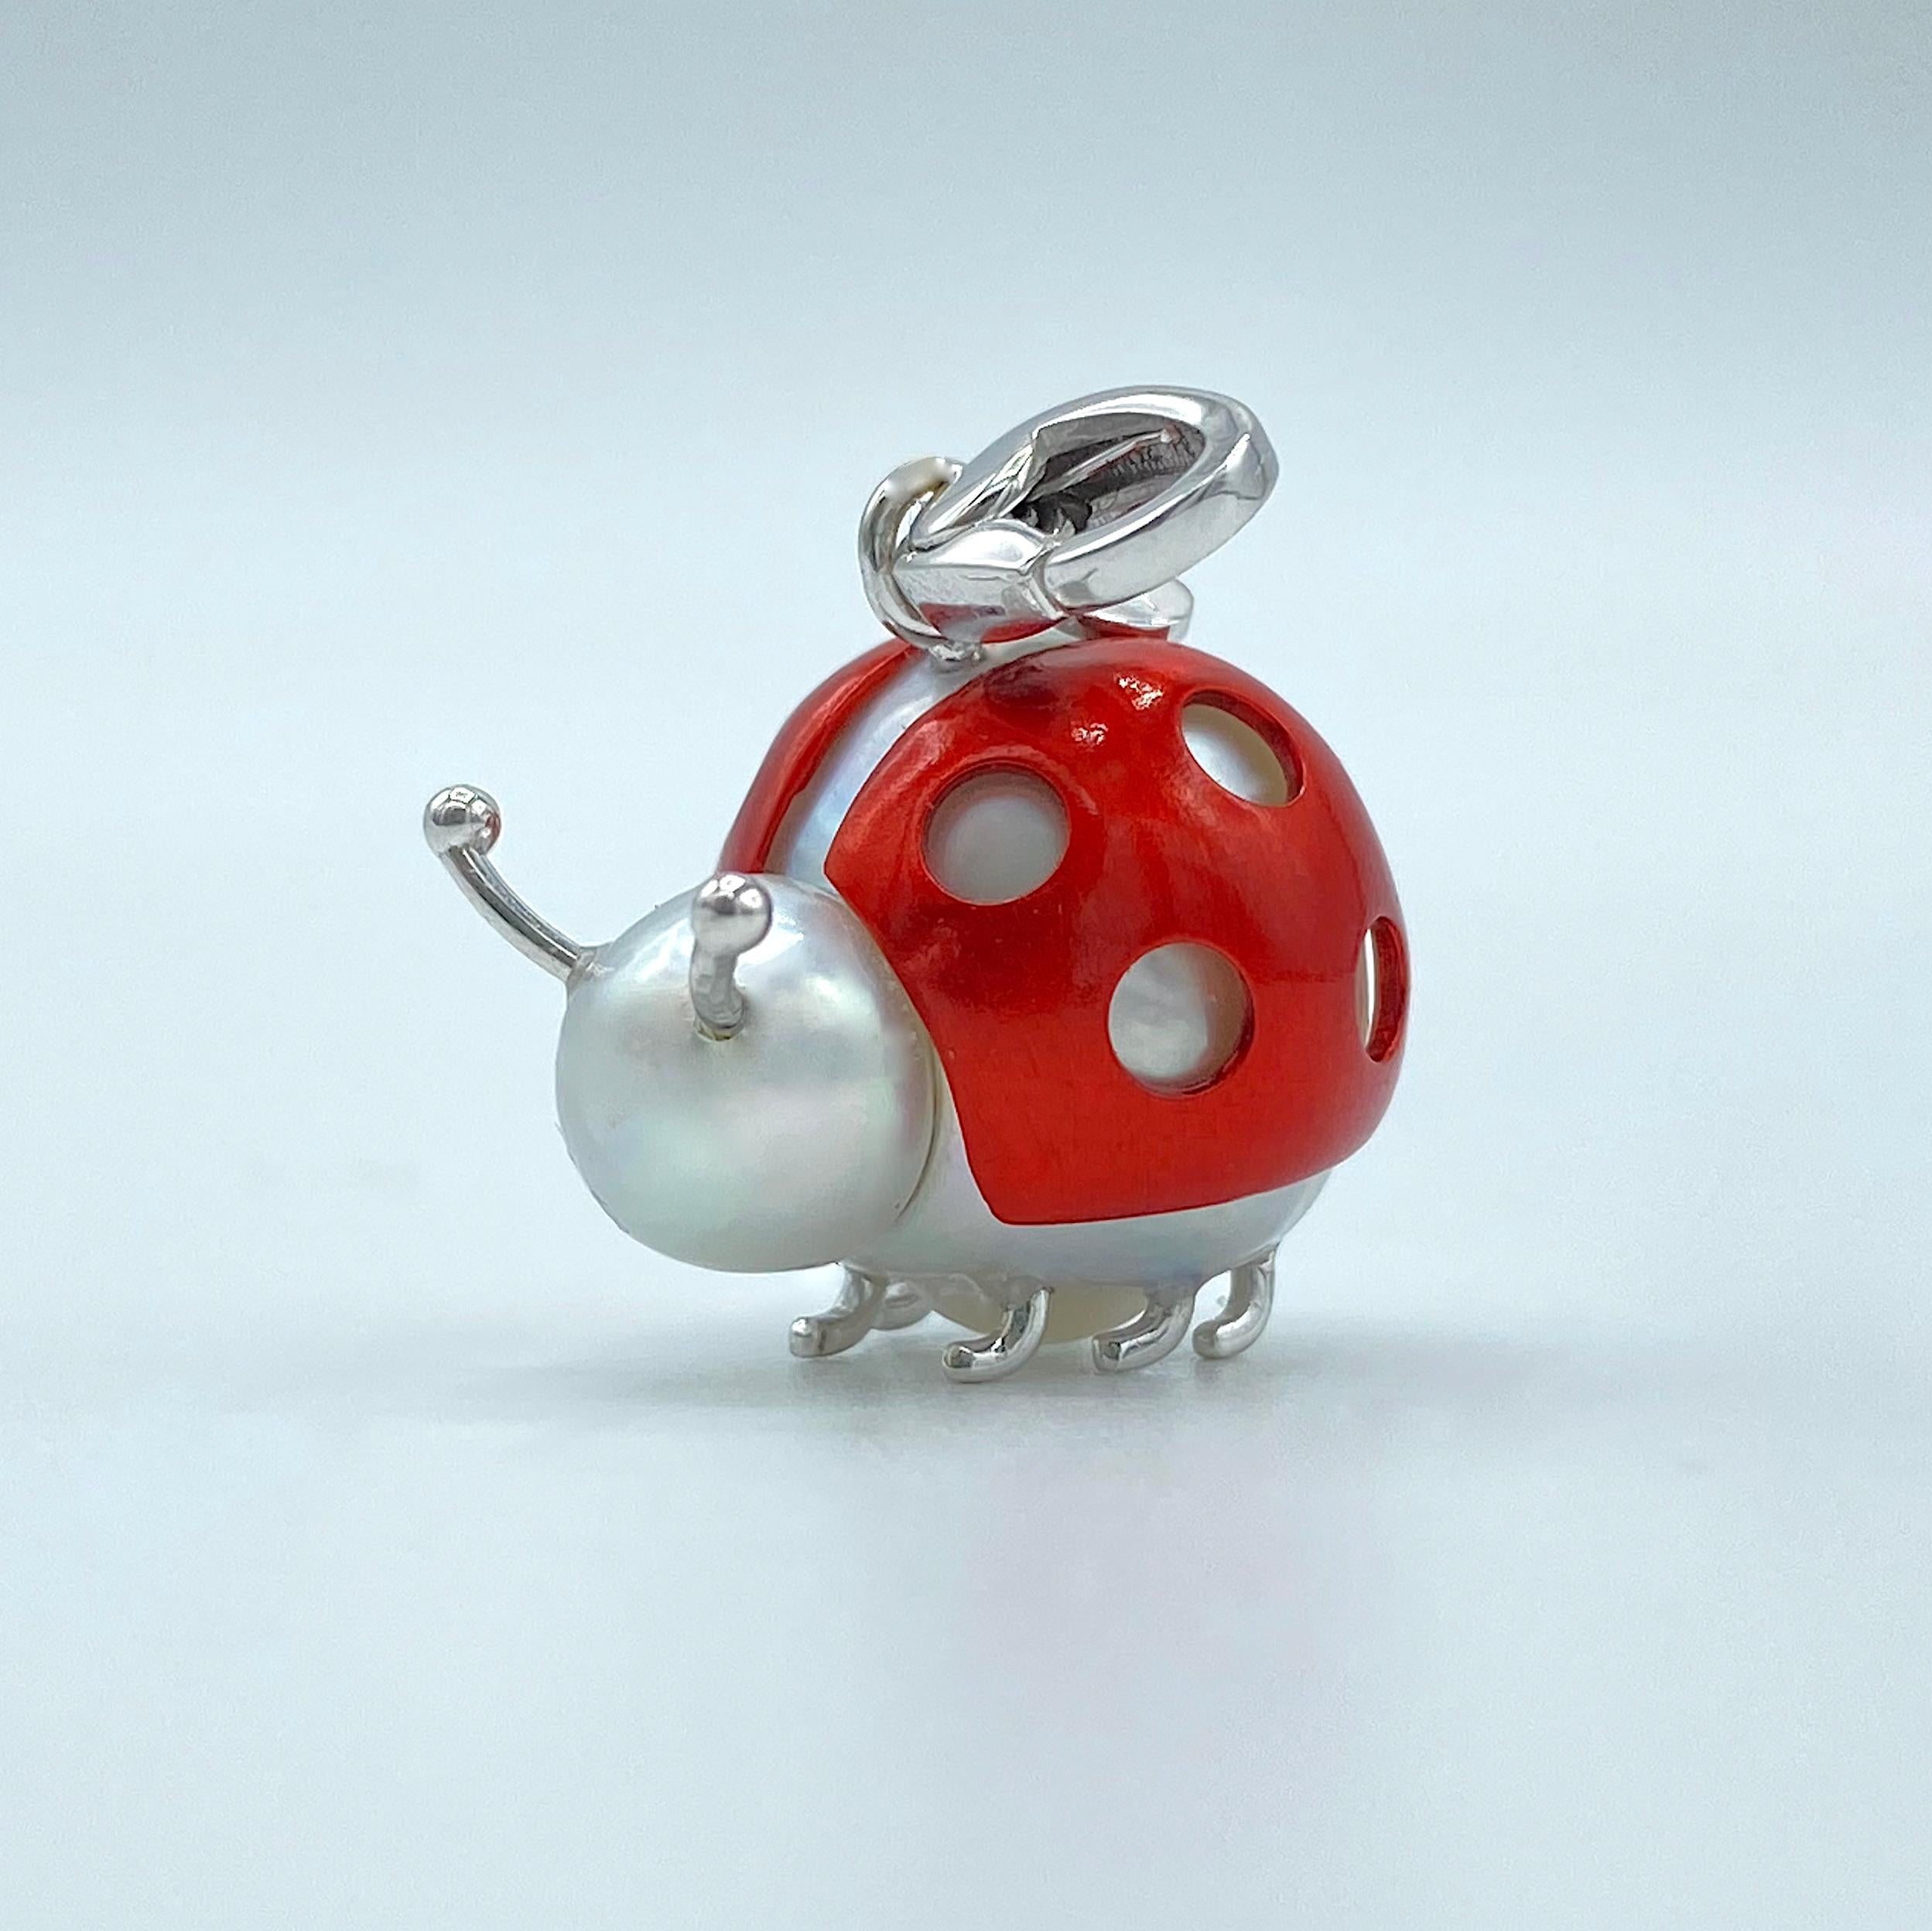 Ladybug/Ladybird 18 Kt Red White Gold Australian Pearl Pendant Necklace Made in Italy

This peculiarly shaped pearl reminded me of the cute ladybugs from a cartoon. So I enjoyed making this pendant: I used white gold for the antennas and the charm,